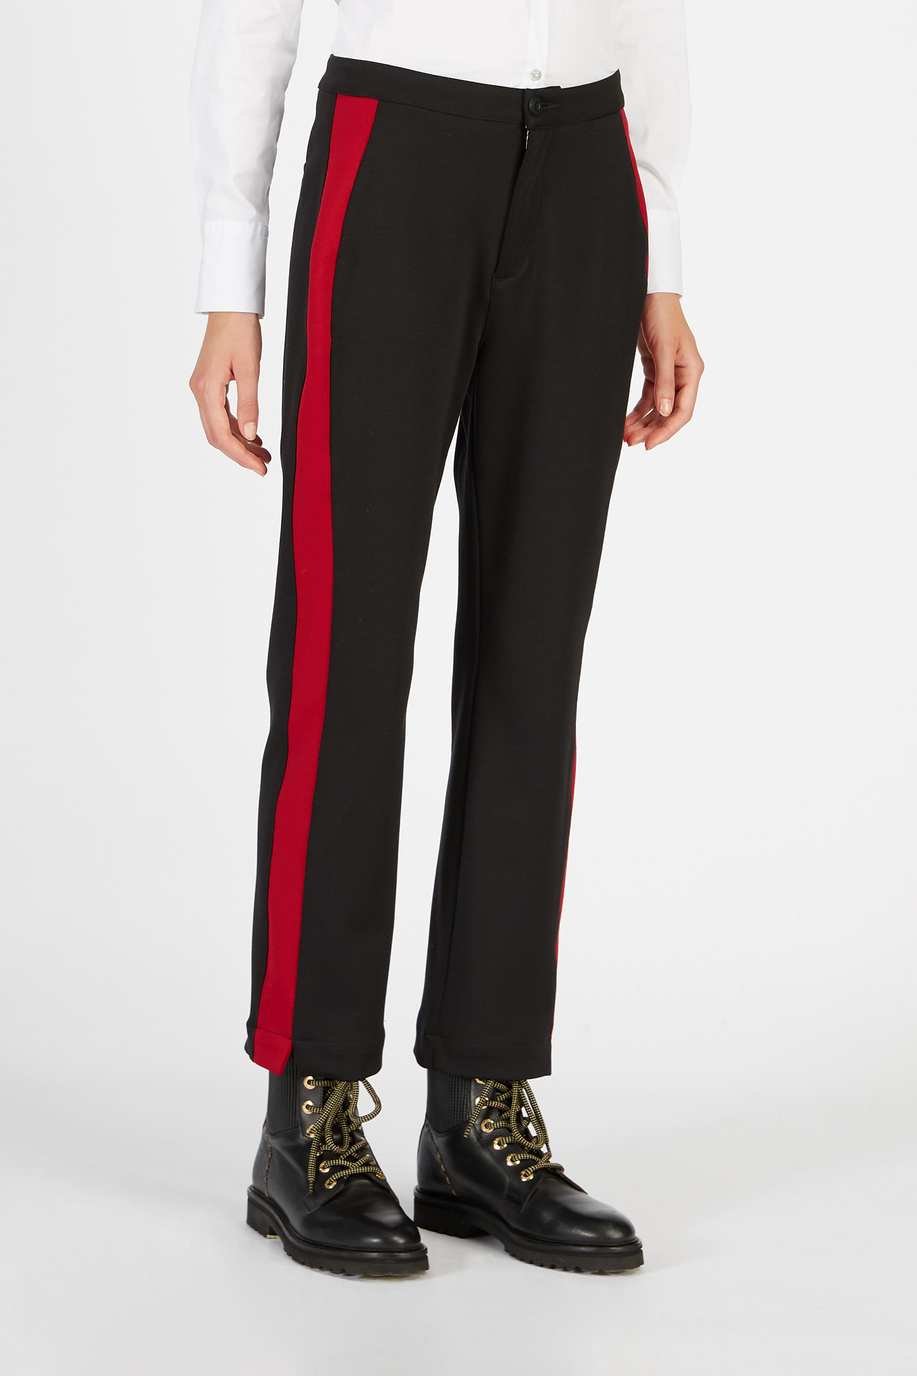 Women’s high-waisted trousers with narrow bottom - Guards - England | La Martina - Official Online Shop